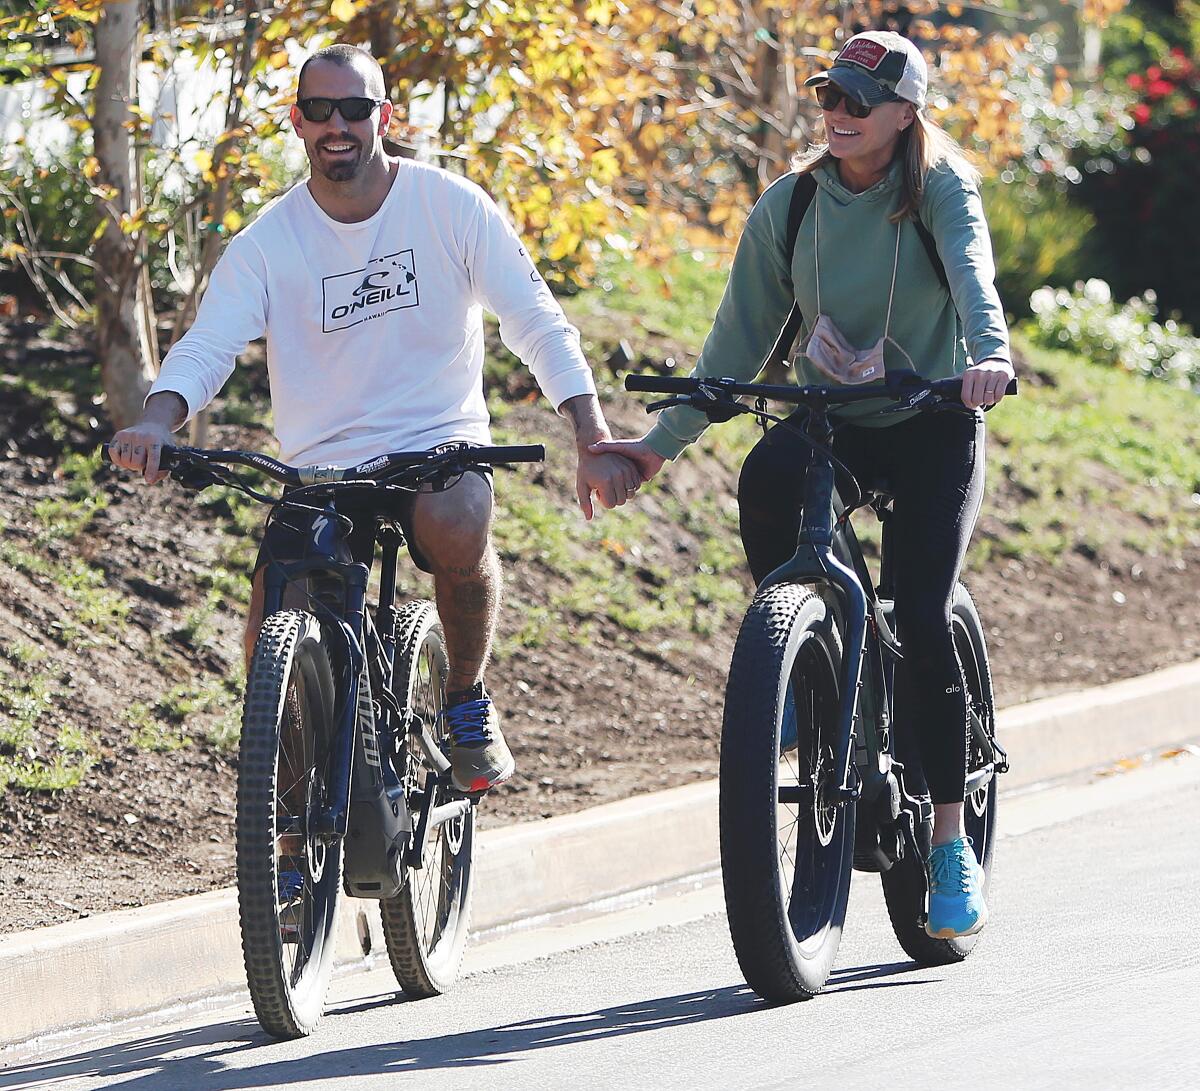 A man in glasses and a woman in glasses and a baseball hat hold hands while riding separate bicycles on a fall day.